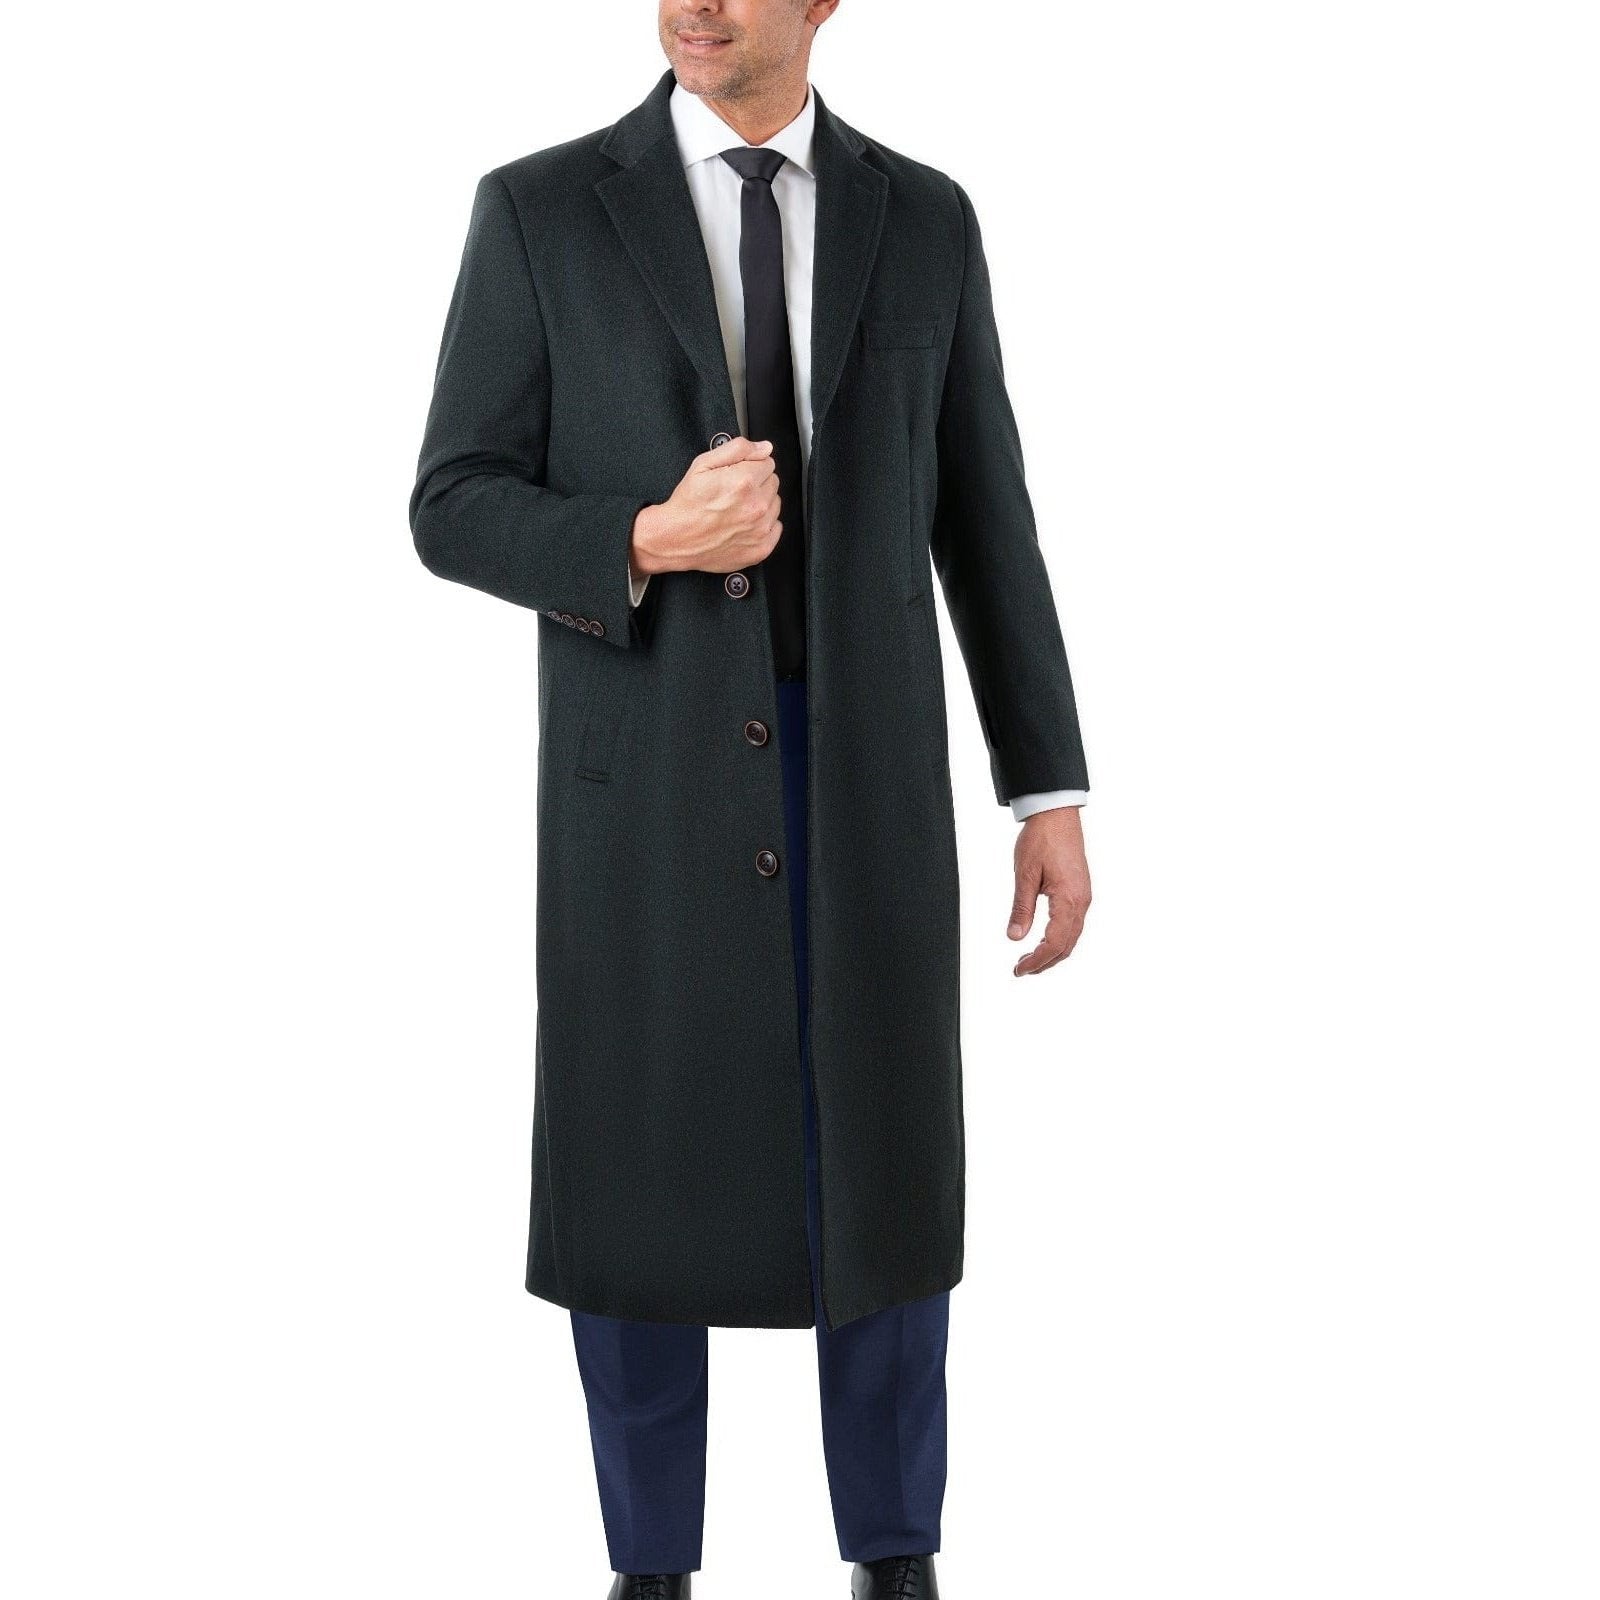 Articles of Style | HOW IT SHOULD FIT: THE OVERCOAT